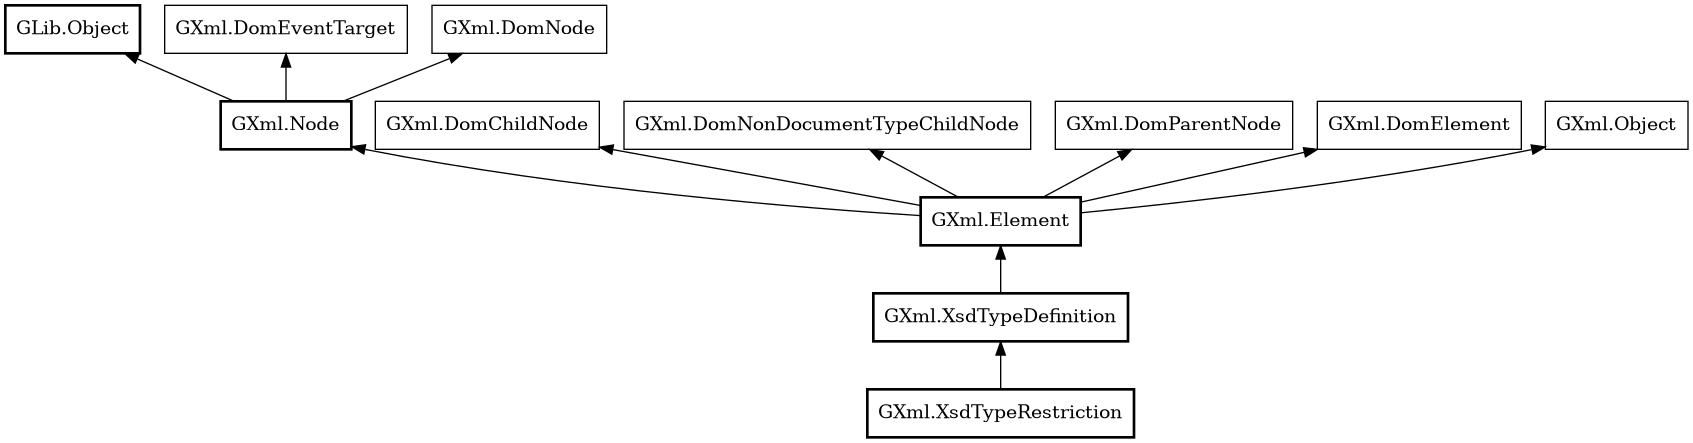 Object hierarchy for XsdTypeRestriction